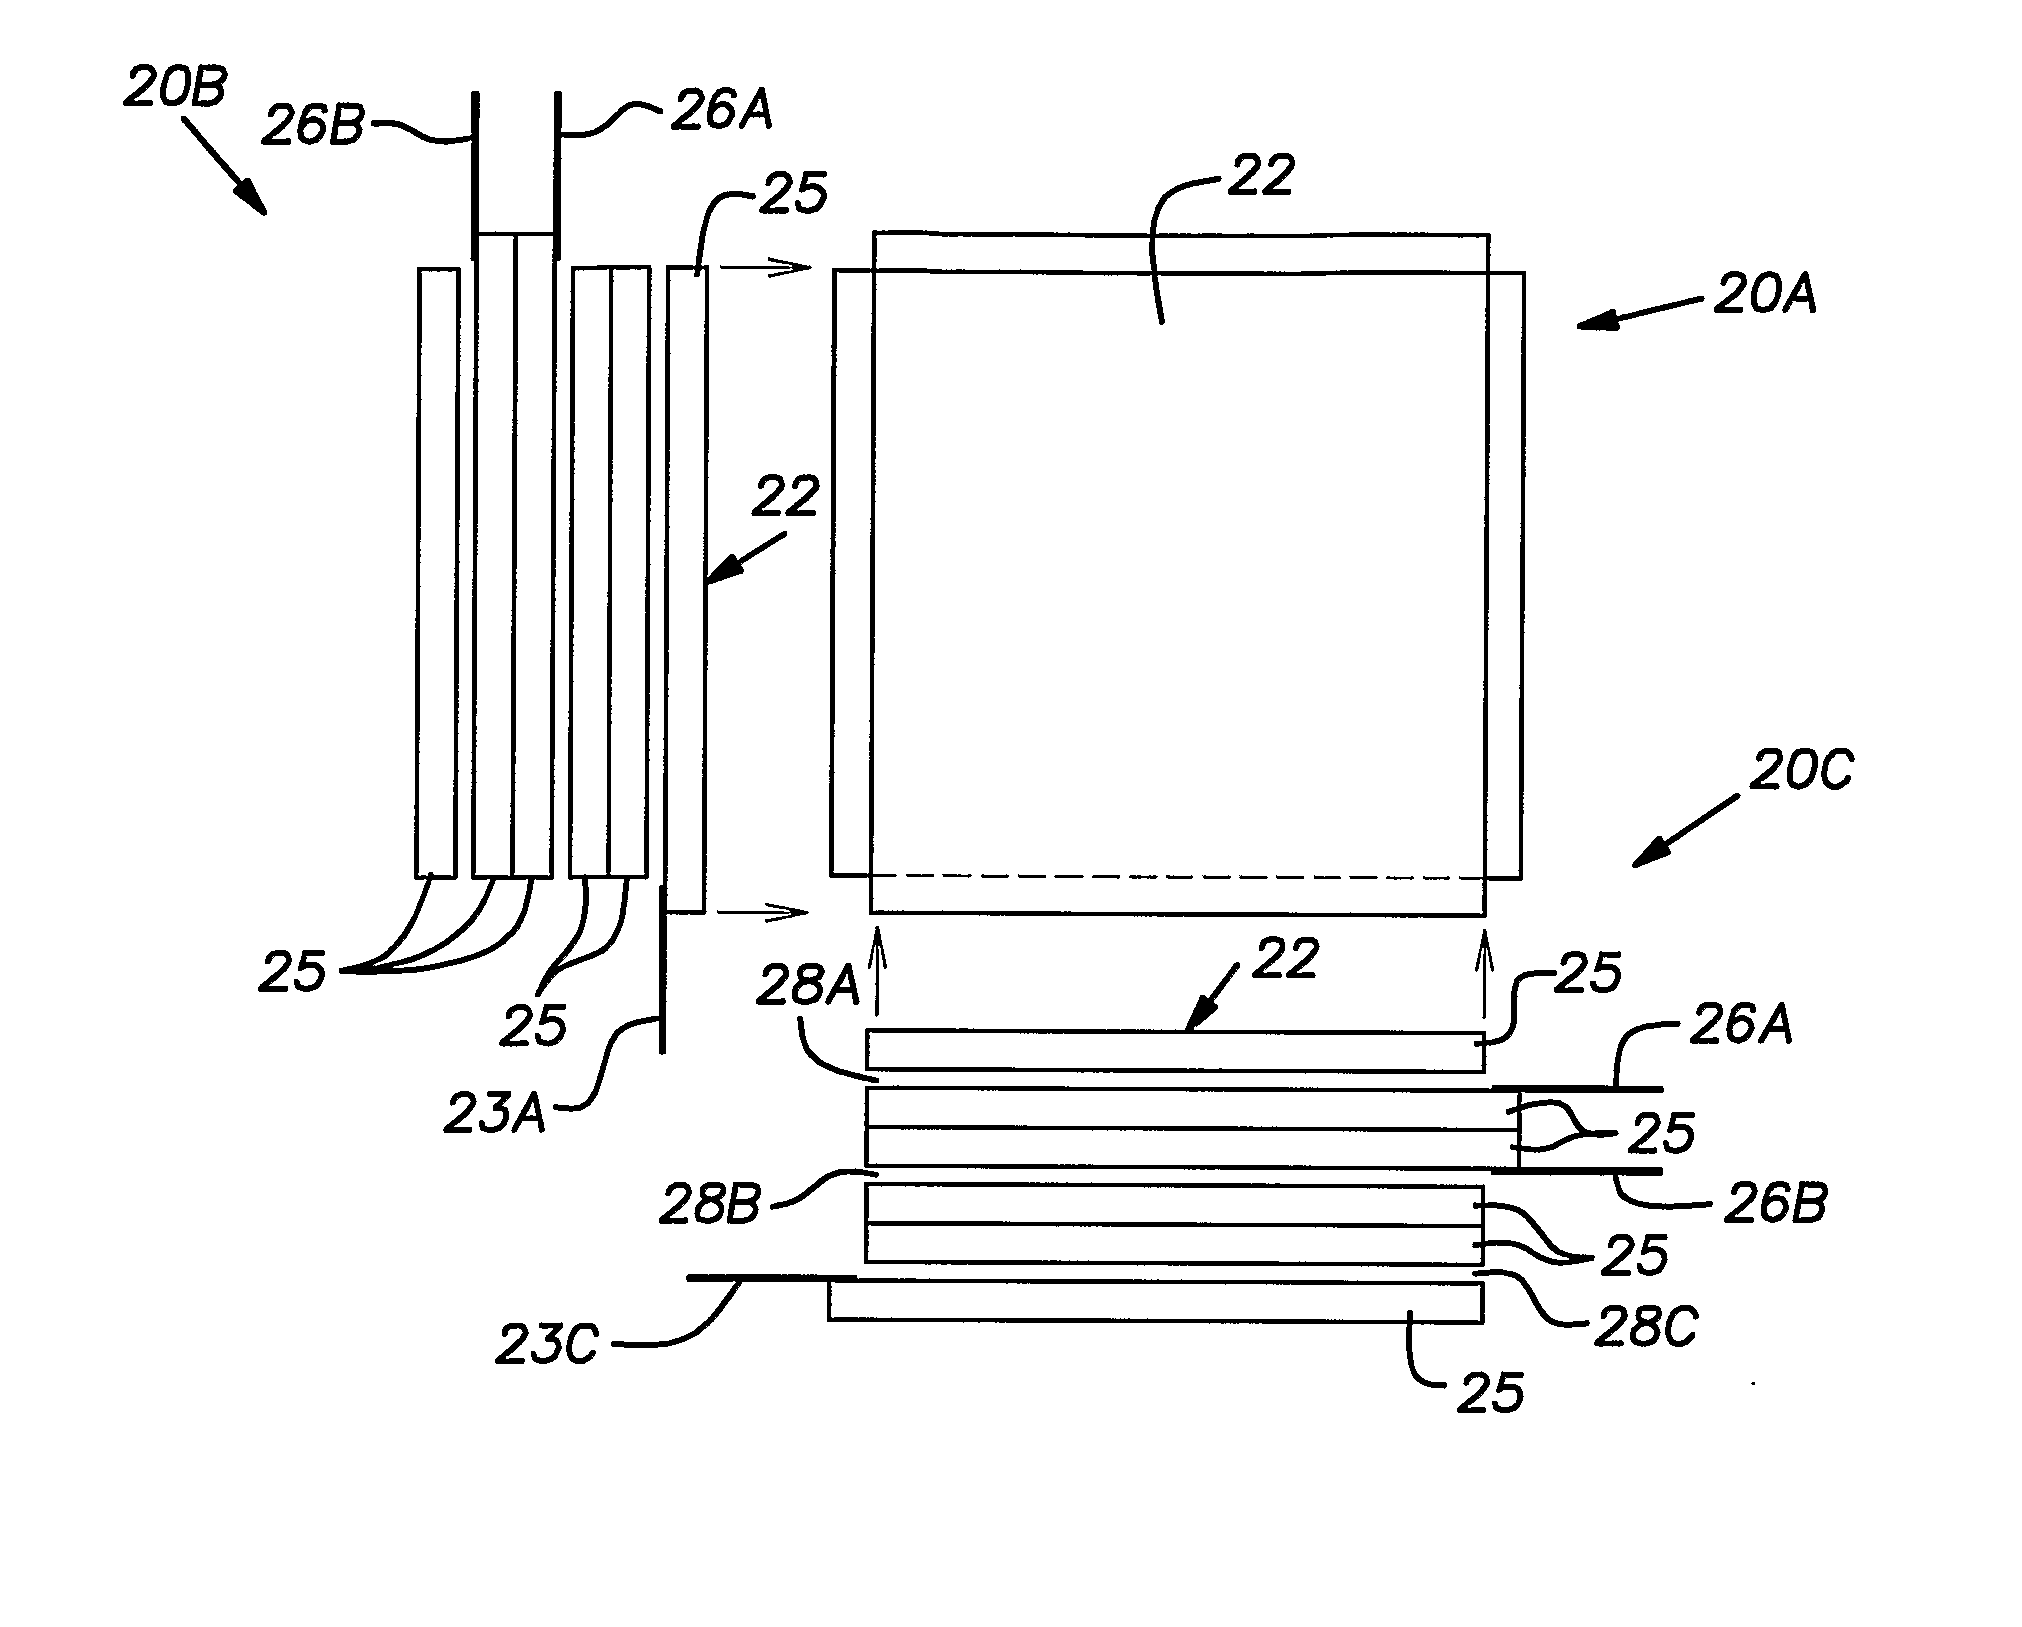 Stacked display with shared electrode addressing